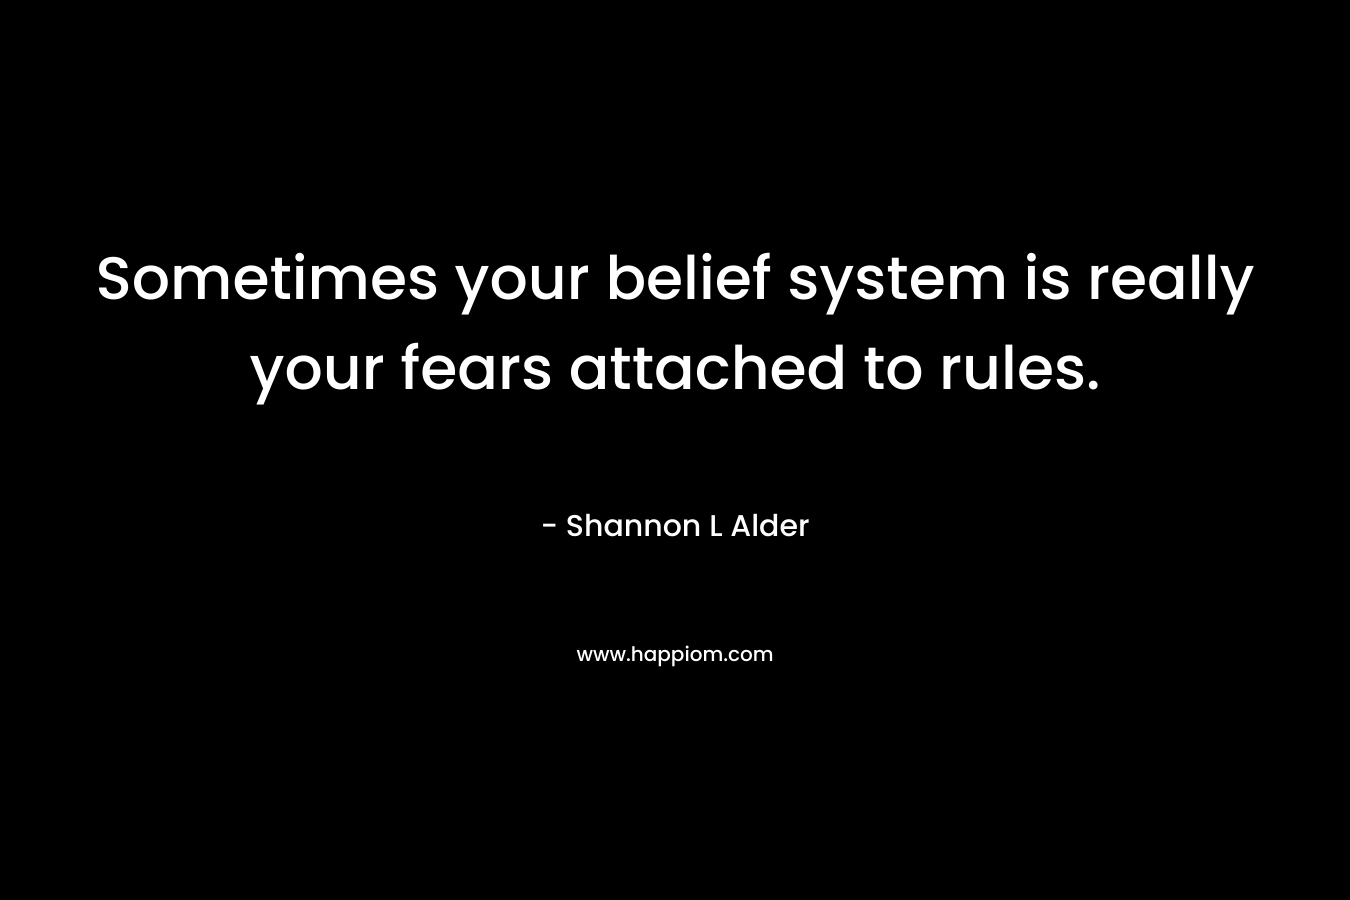 Sometimes your belief system is really your fears attached to rules.